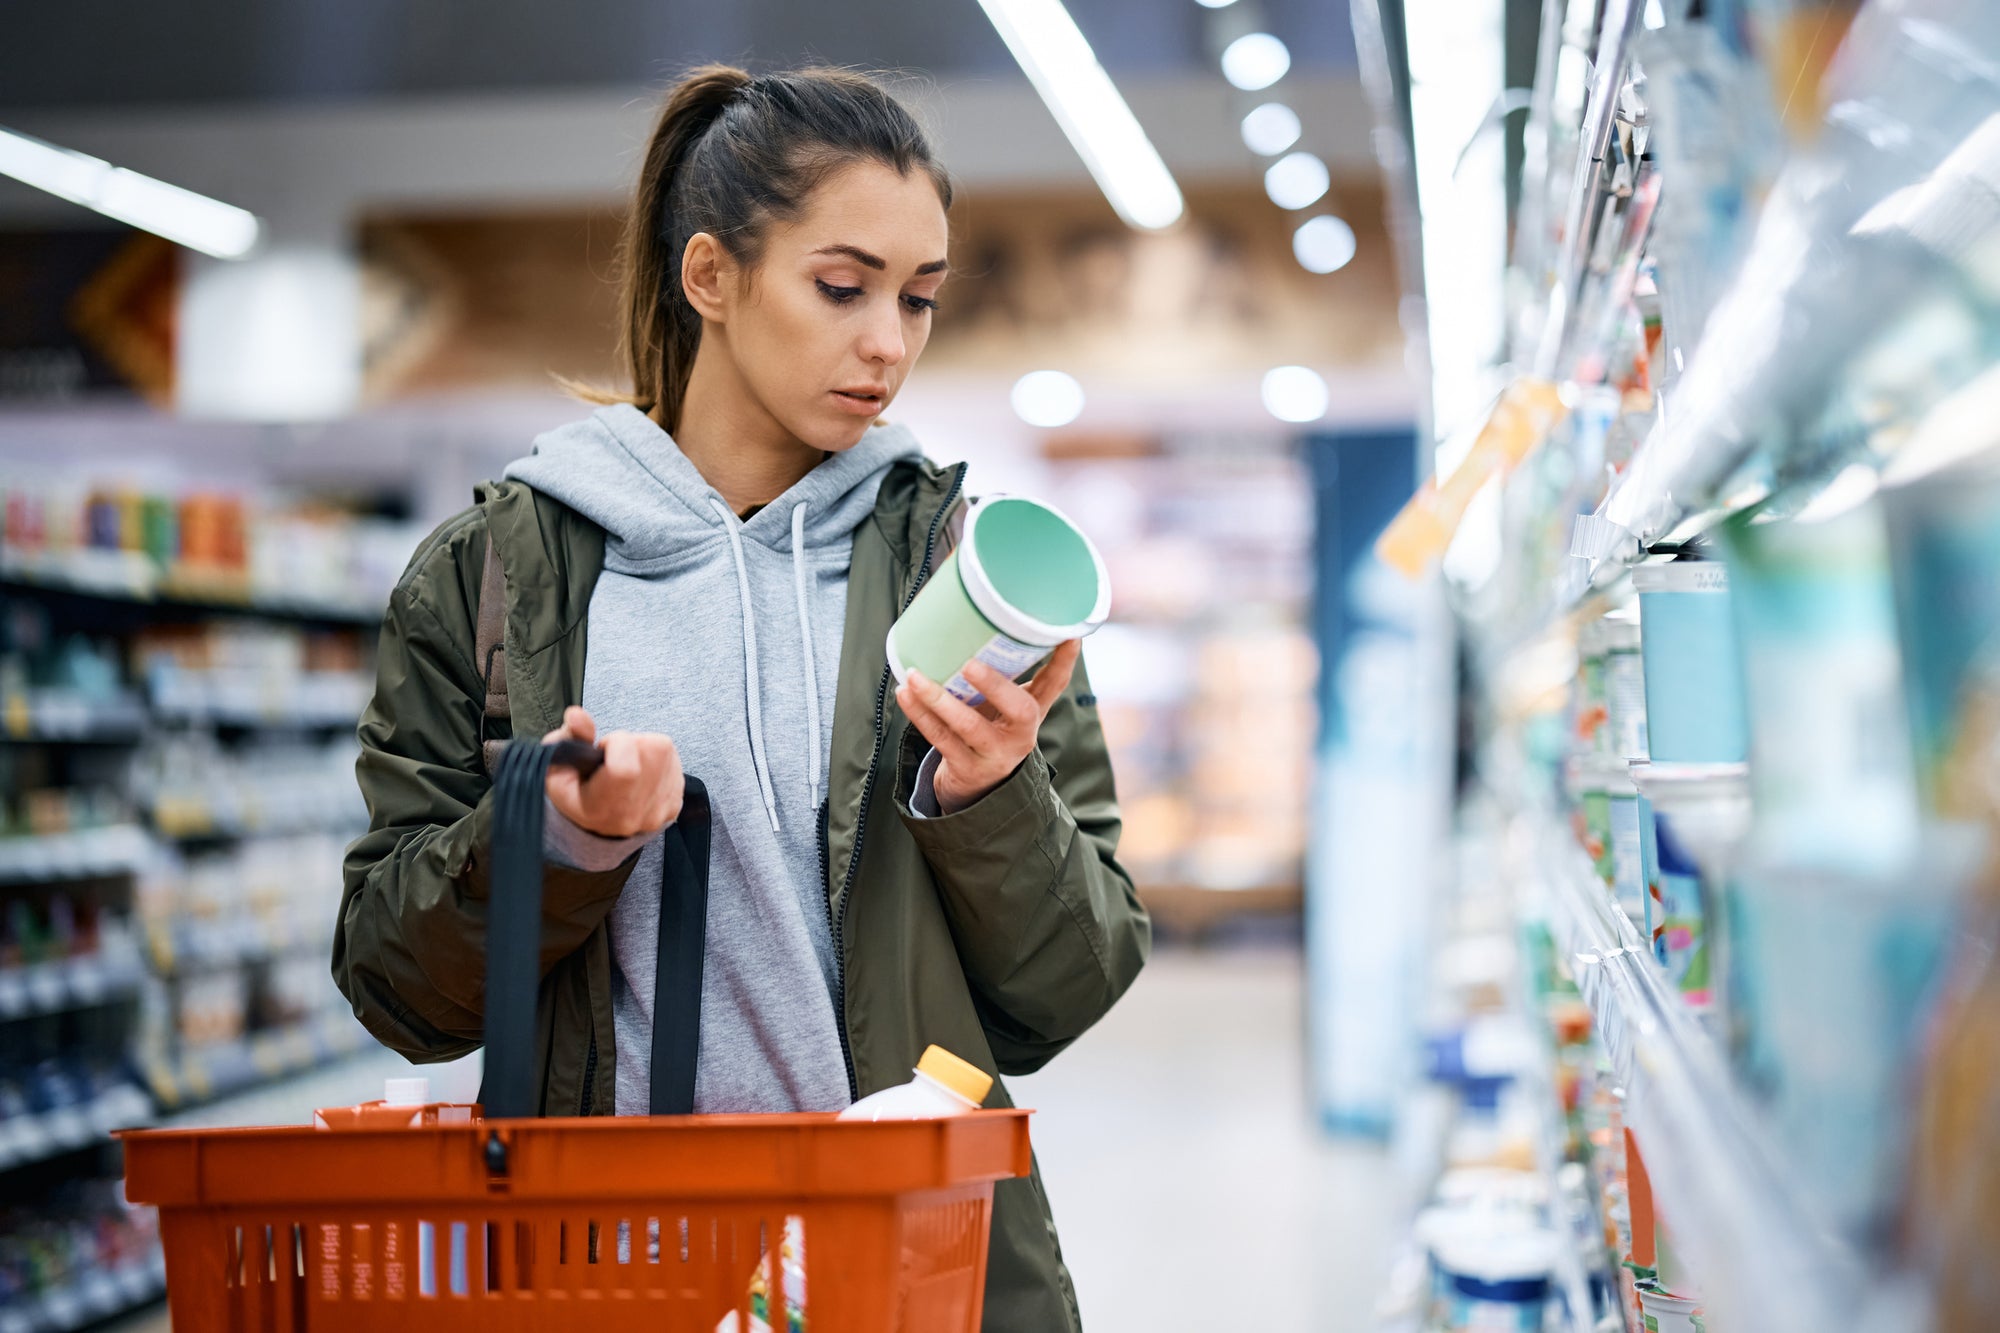 A young woman reads ingredient lists and nutrition information as she selects an item at the grocery store.